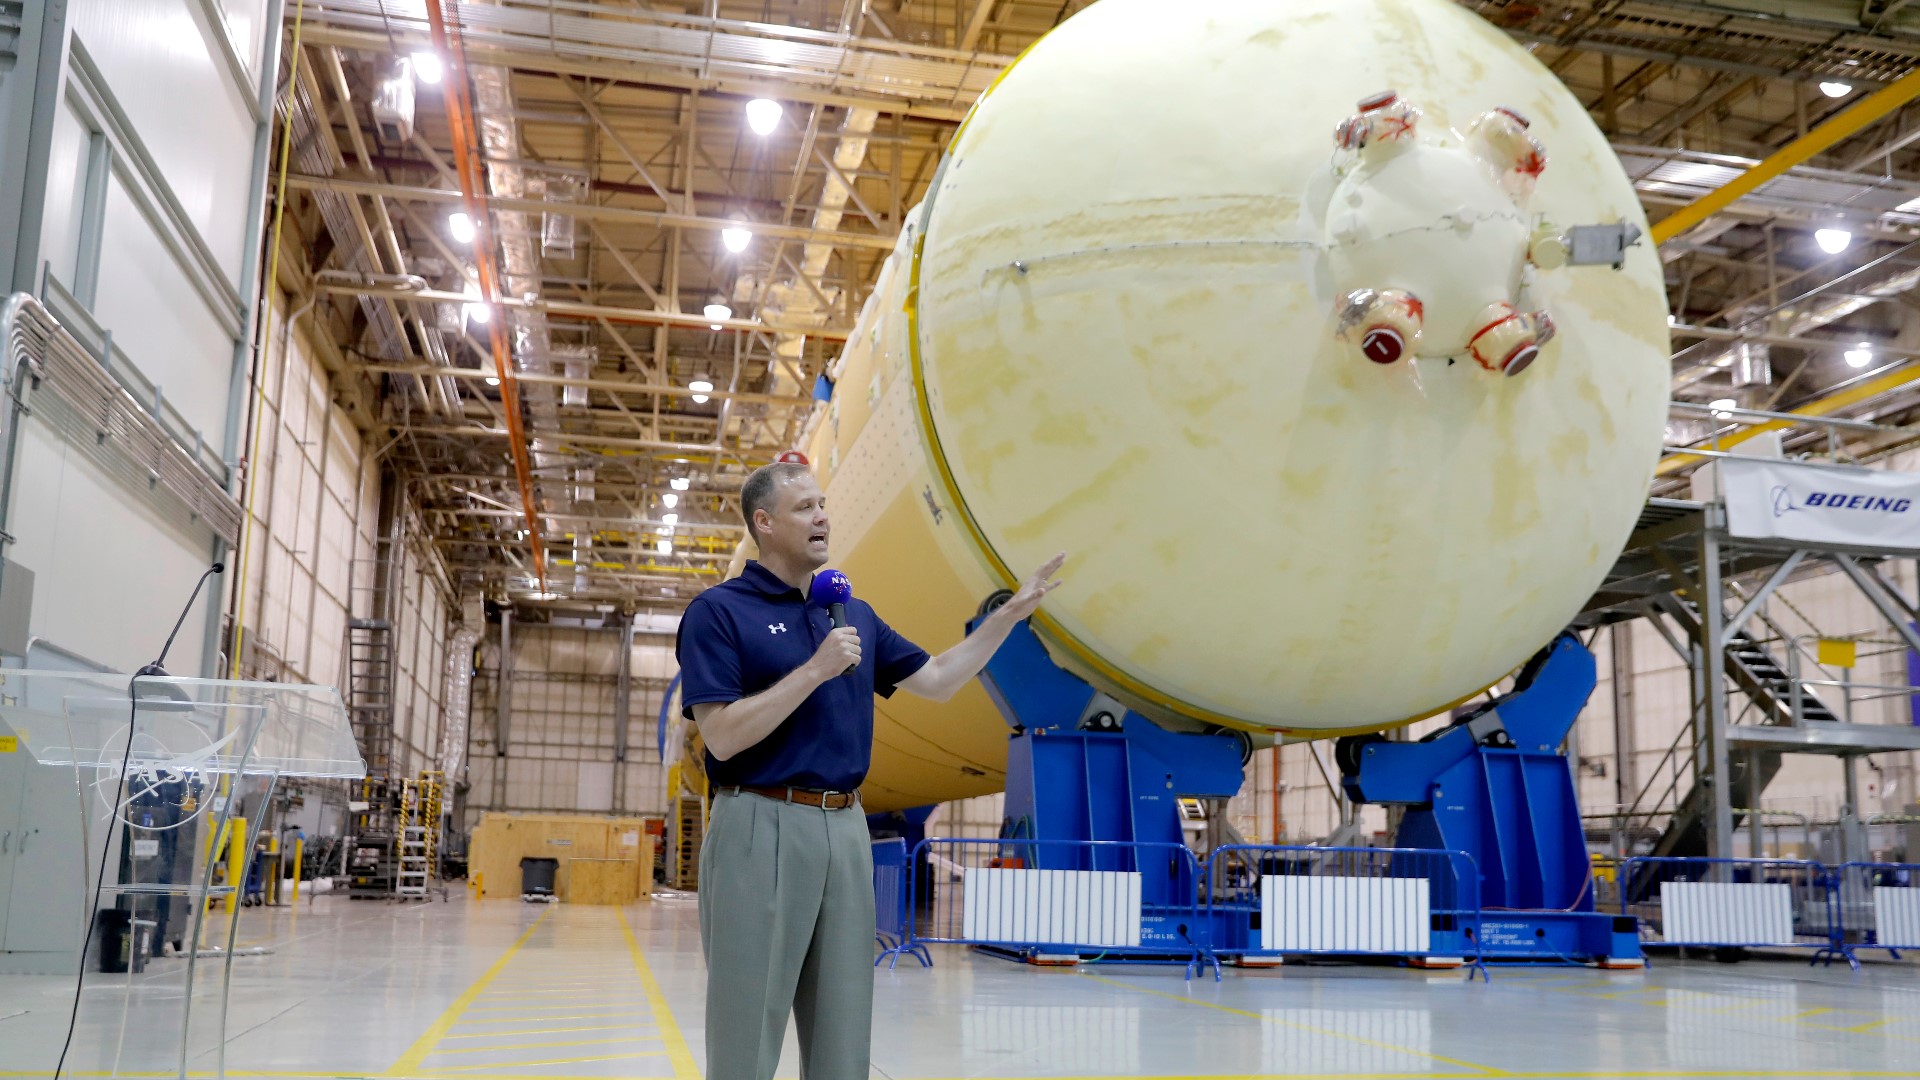 The head of NASA visited the Michoud Assembly facility to get a first-hand look at the future of space exploration.